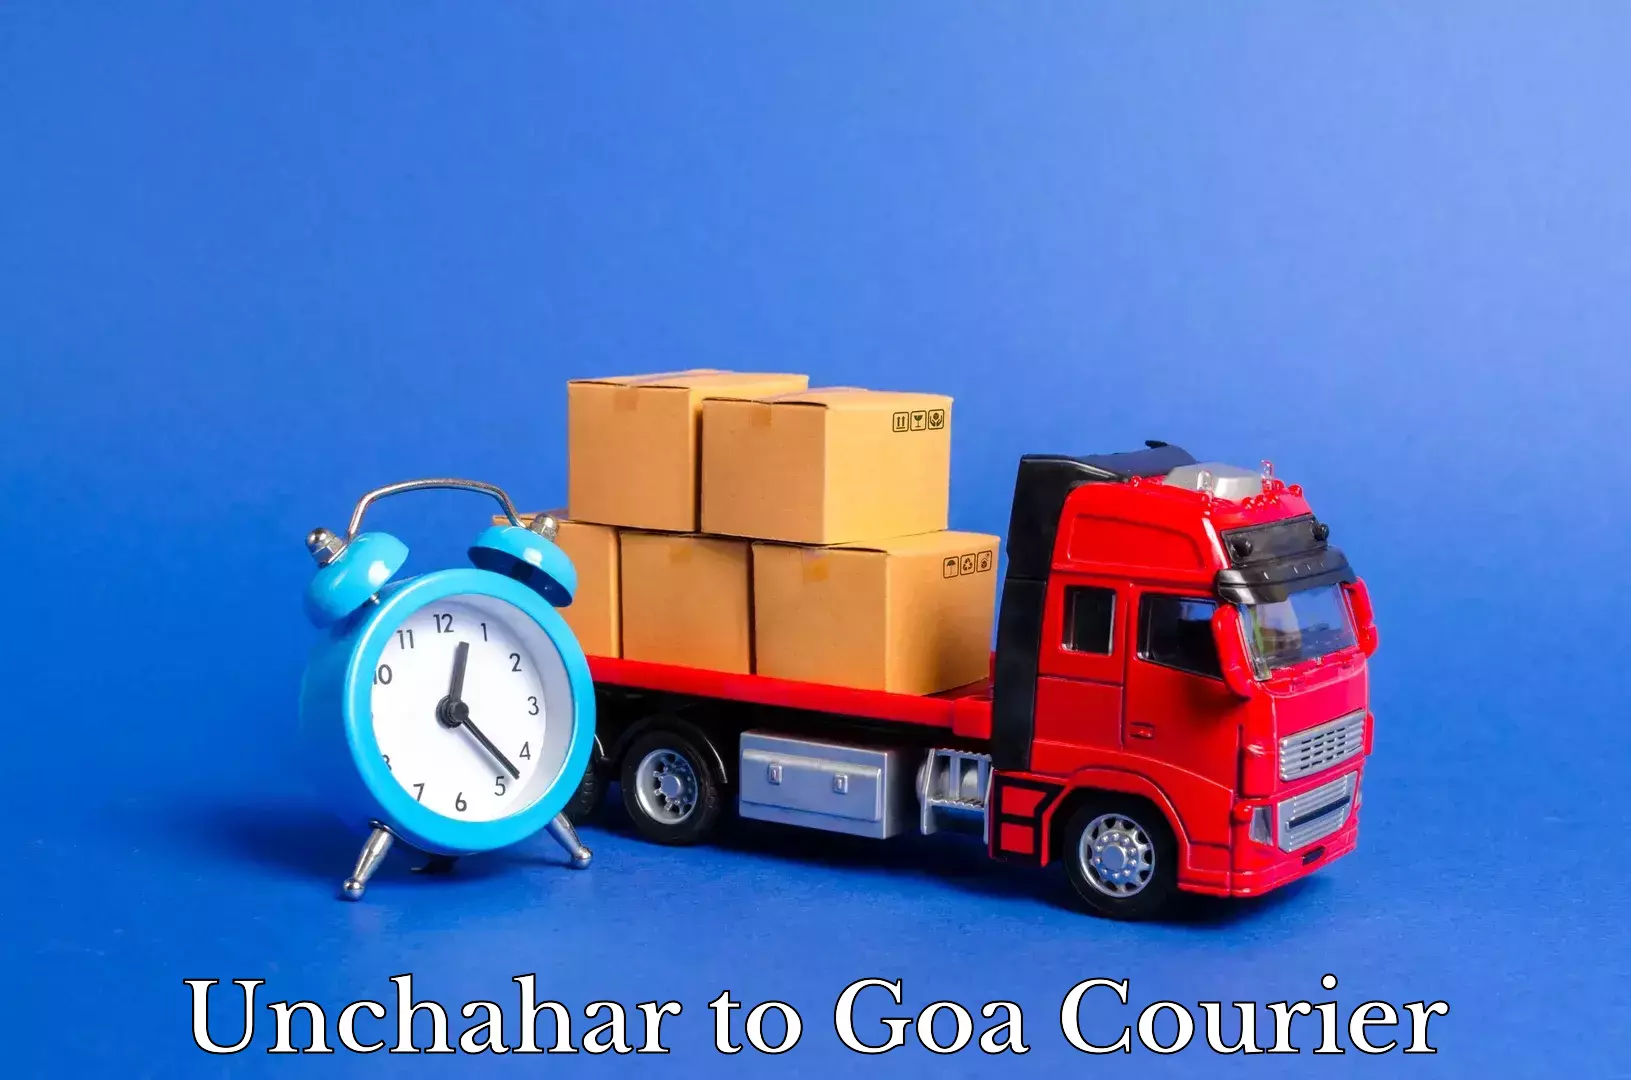 Quality relocation services in Unchahar to Panaji